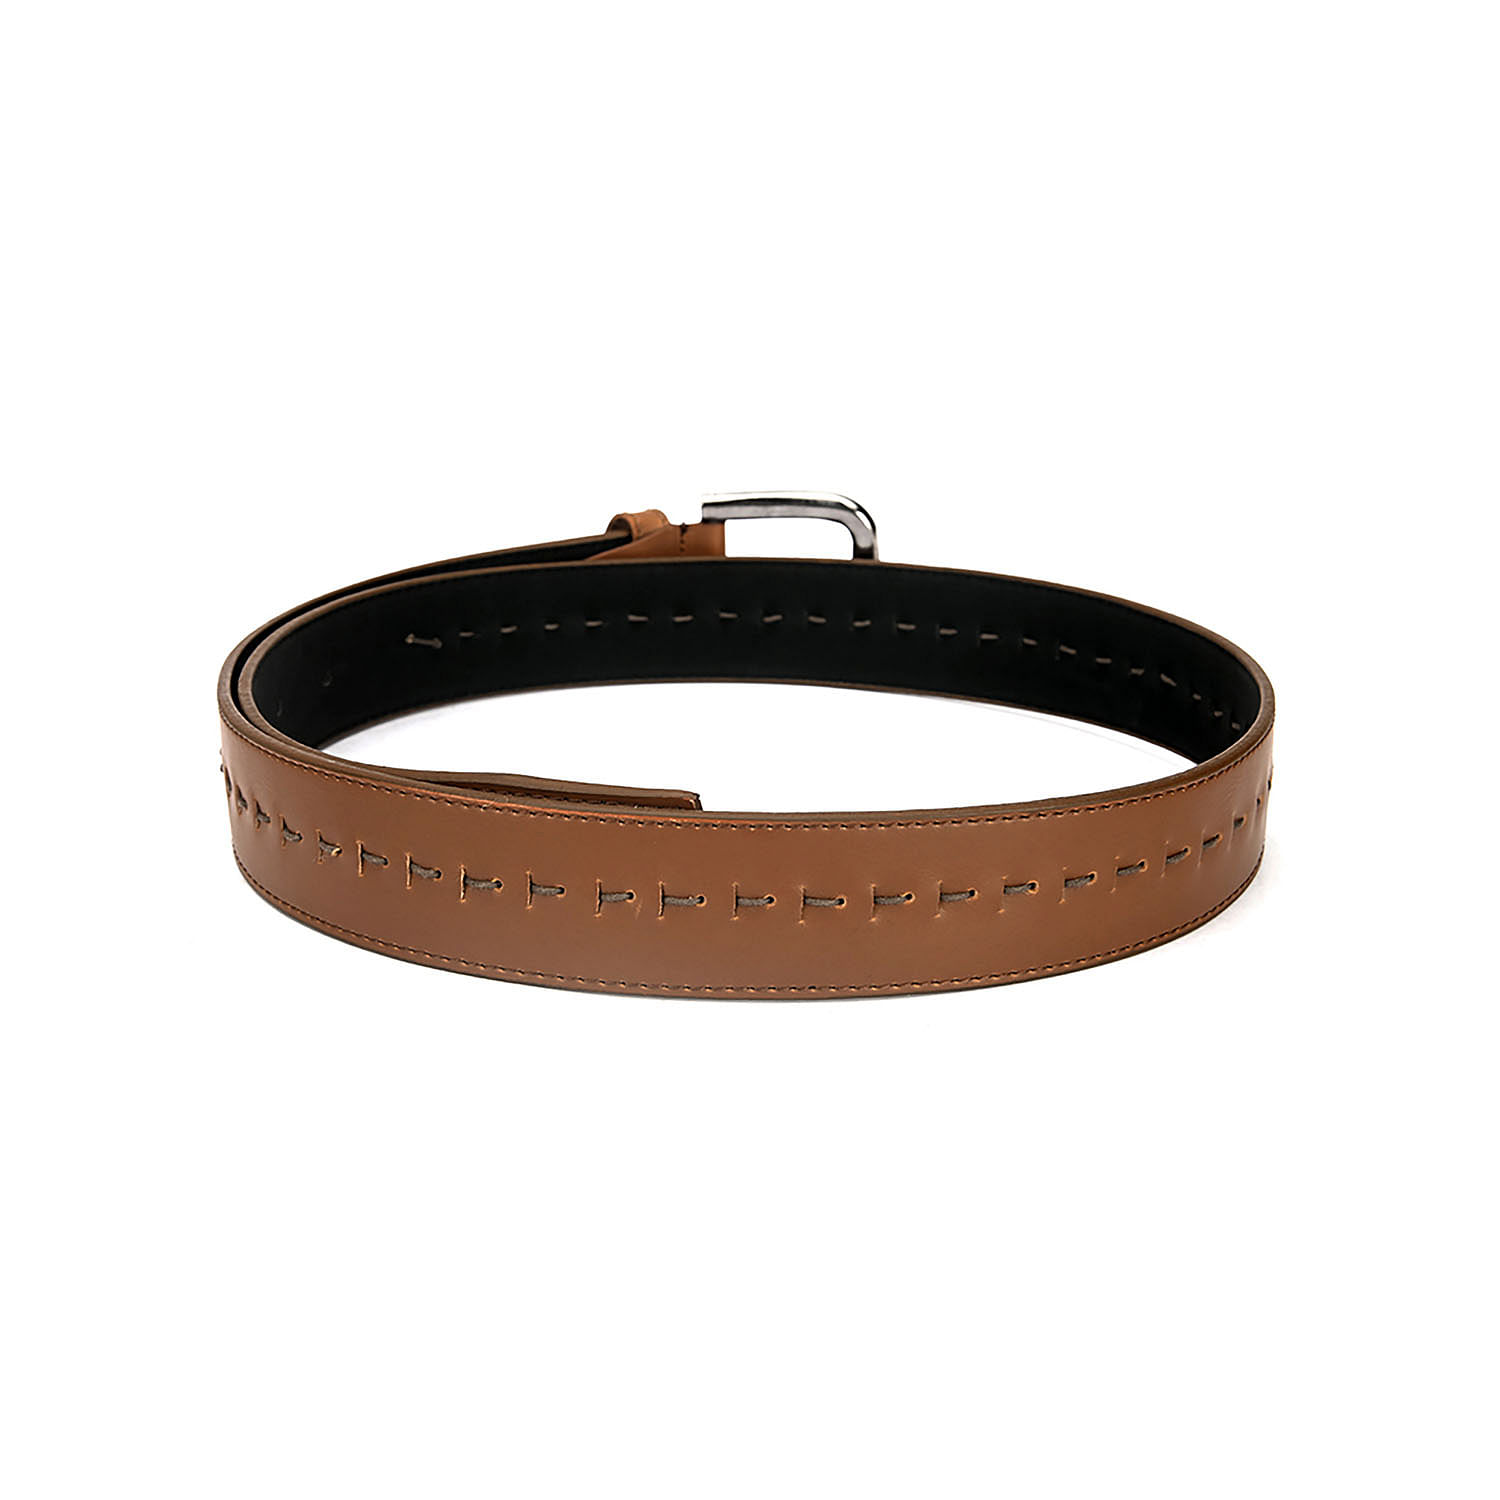 Men's Casual Textured Perforated Belt Tan-LZ-CB-103